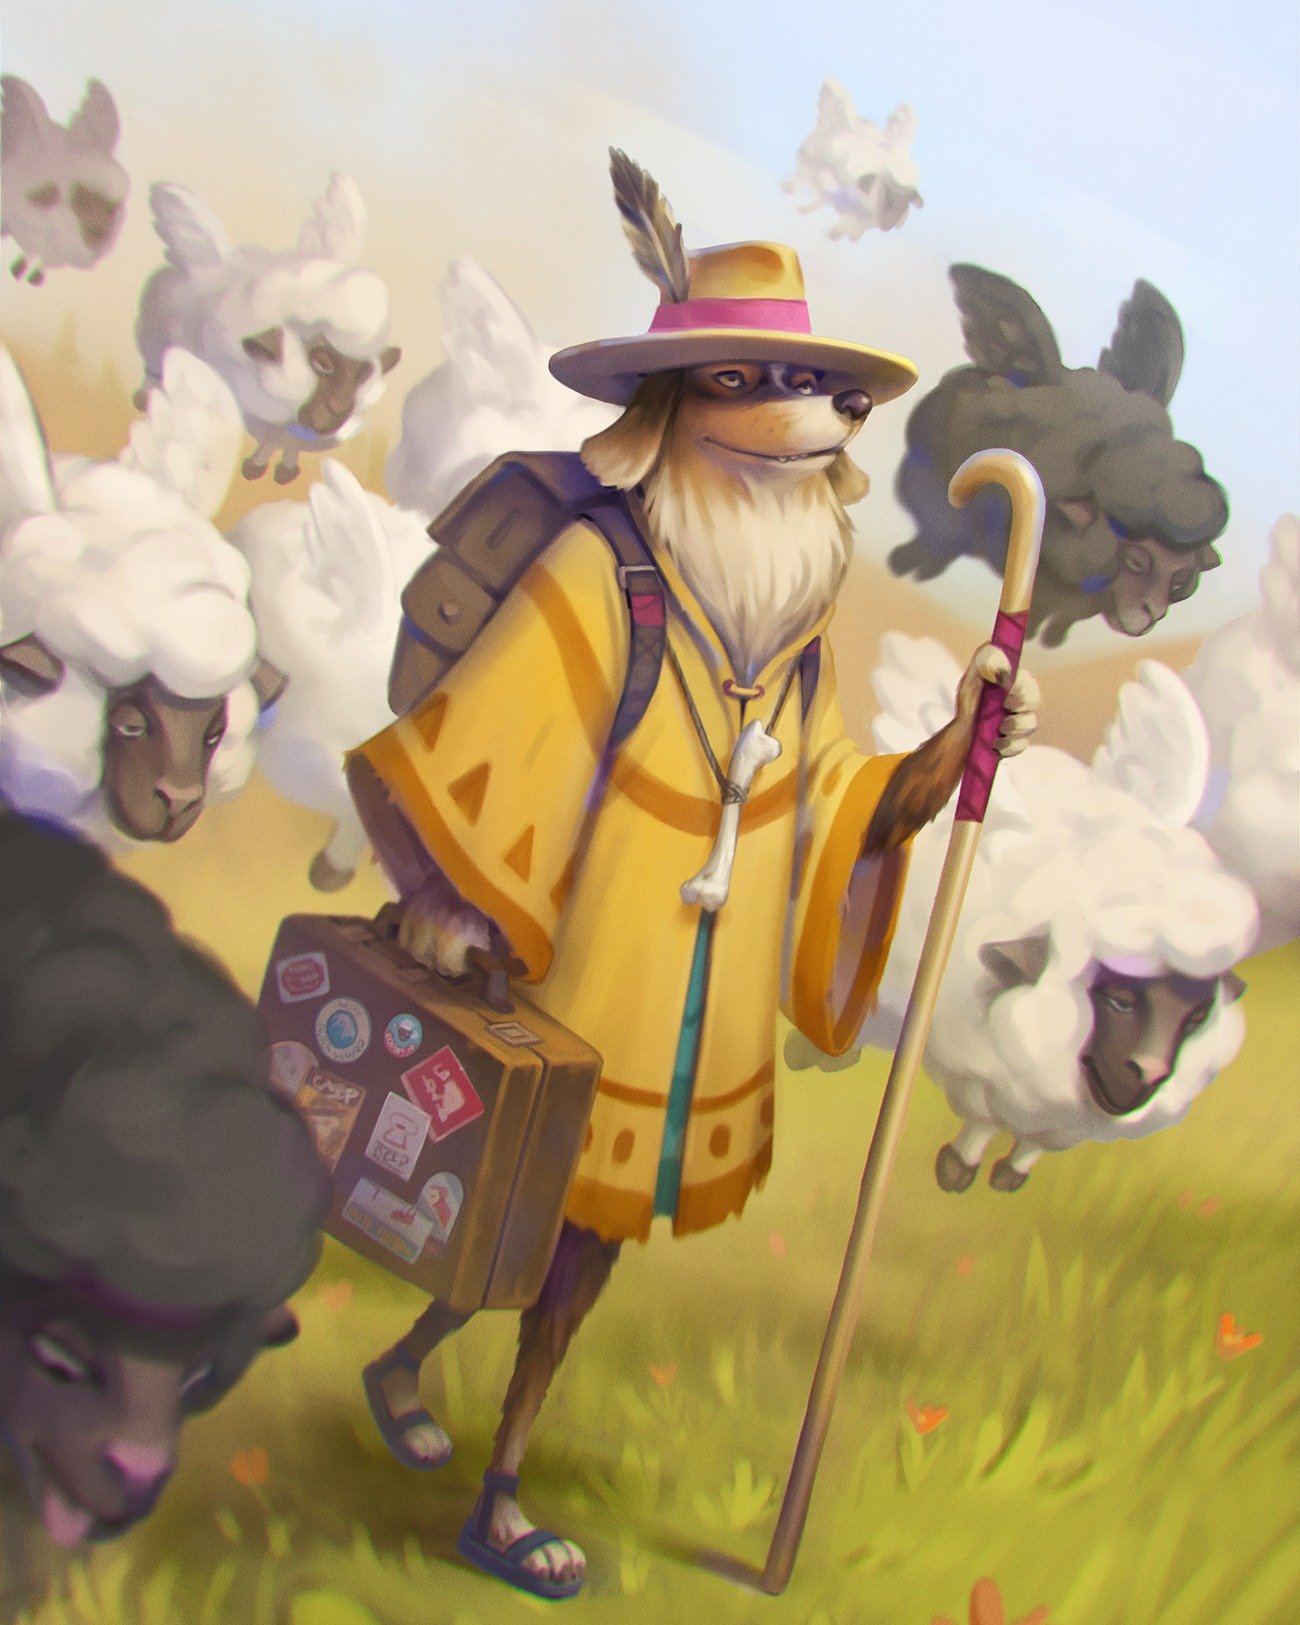 Submission by Alexander Vinogradov* ( @alexmcgrapes ) for the #CDChallenge - the theme for April 2024 was #TravelingShepherd⠀⠀⠀⠀⠀⁣⠀⁣⠀⠀⠀⁠⠀⁠⠀⁠⠀⁠⠀⁠⠀⁠⠀⁠⠀⁠⠀
.⠀⠀⠀⠀⠀⠀⁣⠀⁣⠀⠀⠀⁠⠀⁠⠀⁠⠀⁠⠀⁠⠀⁠⠀⁠⠀⁠⠀
.⠀⠀⠀⠀⠀⠀⁣⠀⁣⠀⠀⠀⁠⠀⁠⠀⁠⠀⁠⠀⁠⠀⁠⠀⁠⠀⁠⠀
.⠀⠀⠀⠀⠀⠀⁣⠀⁣⠀⠀⠀⁠⠀⁠⠀⁠⠀⁠⠀⁠⠀⁠⠀⁠⠀⁠⠀
Presente